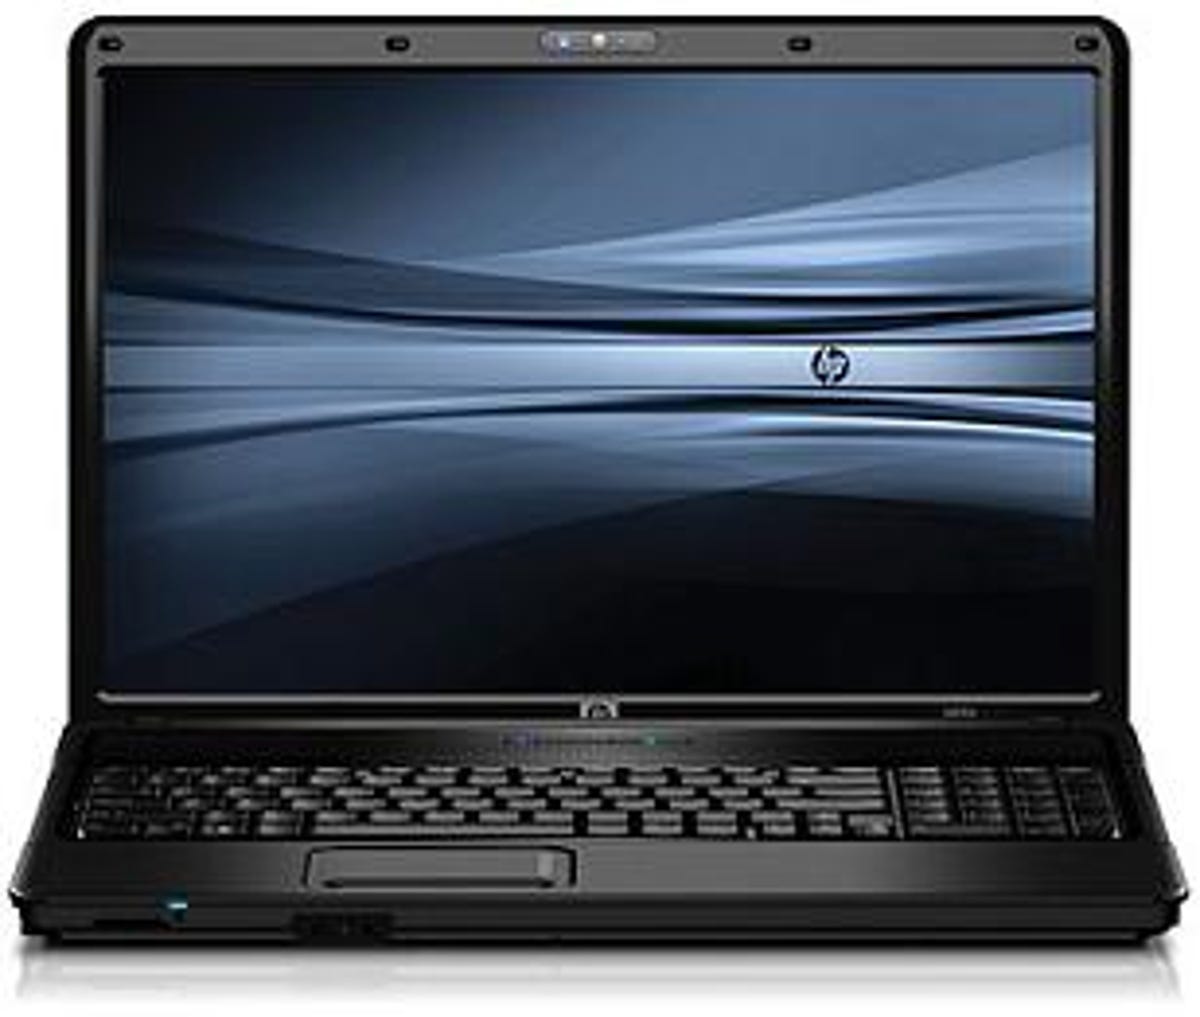 HP 17-inch 6830s is offered with the AMD-ATI HD 3430 graphics chip